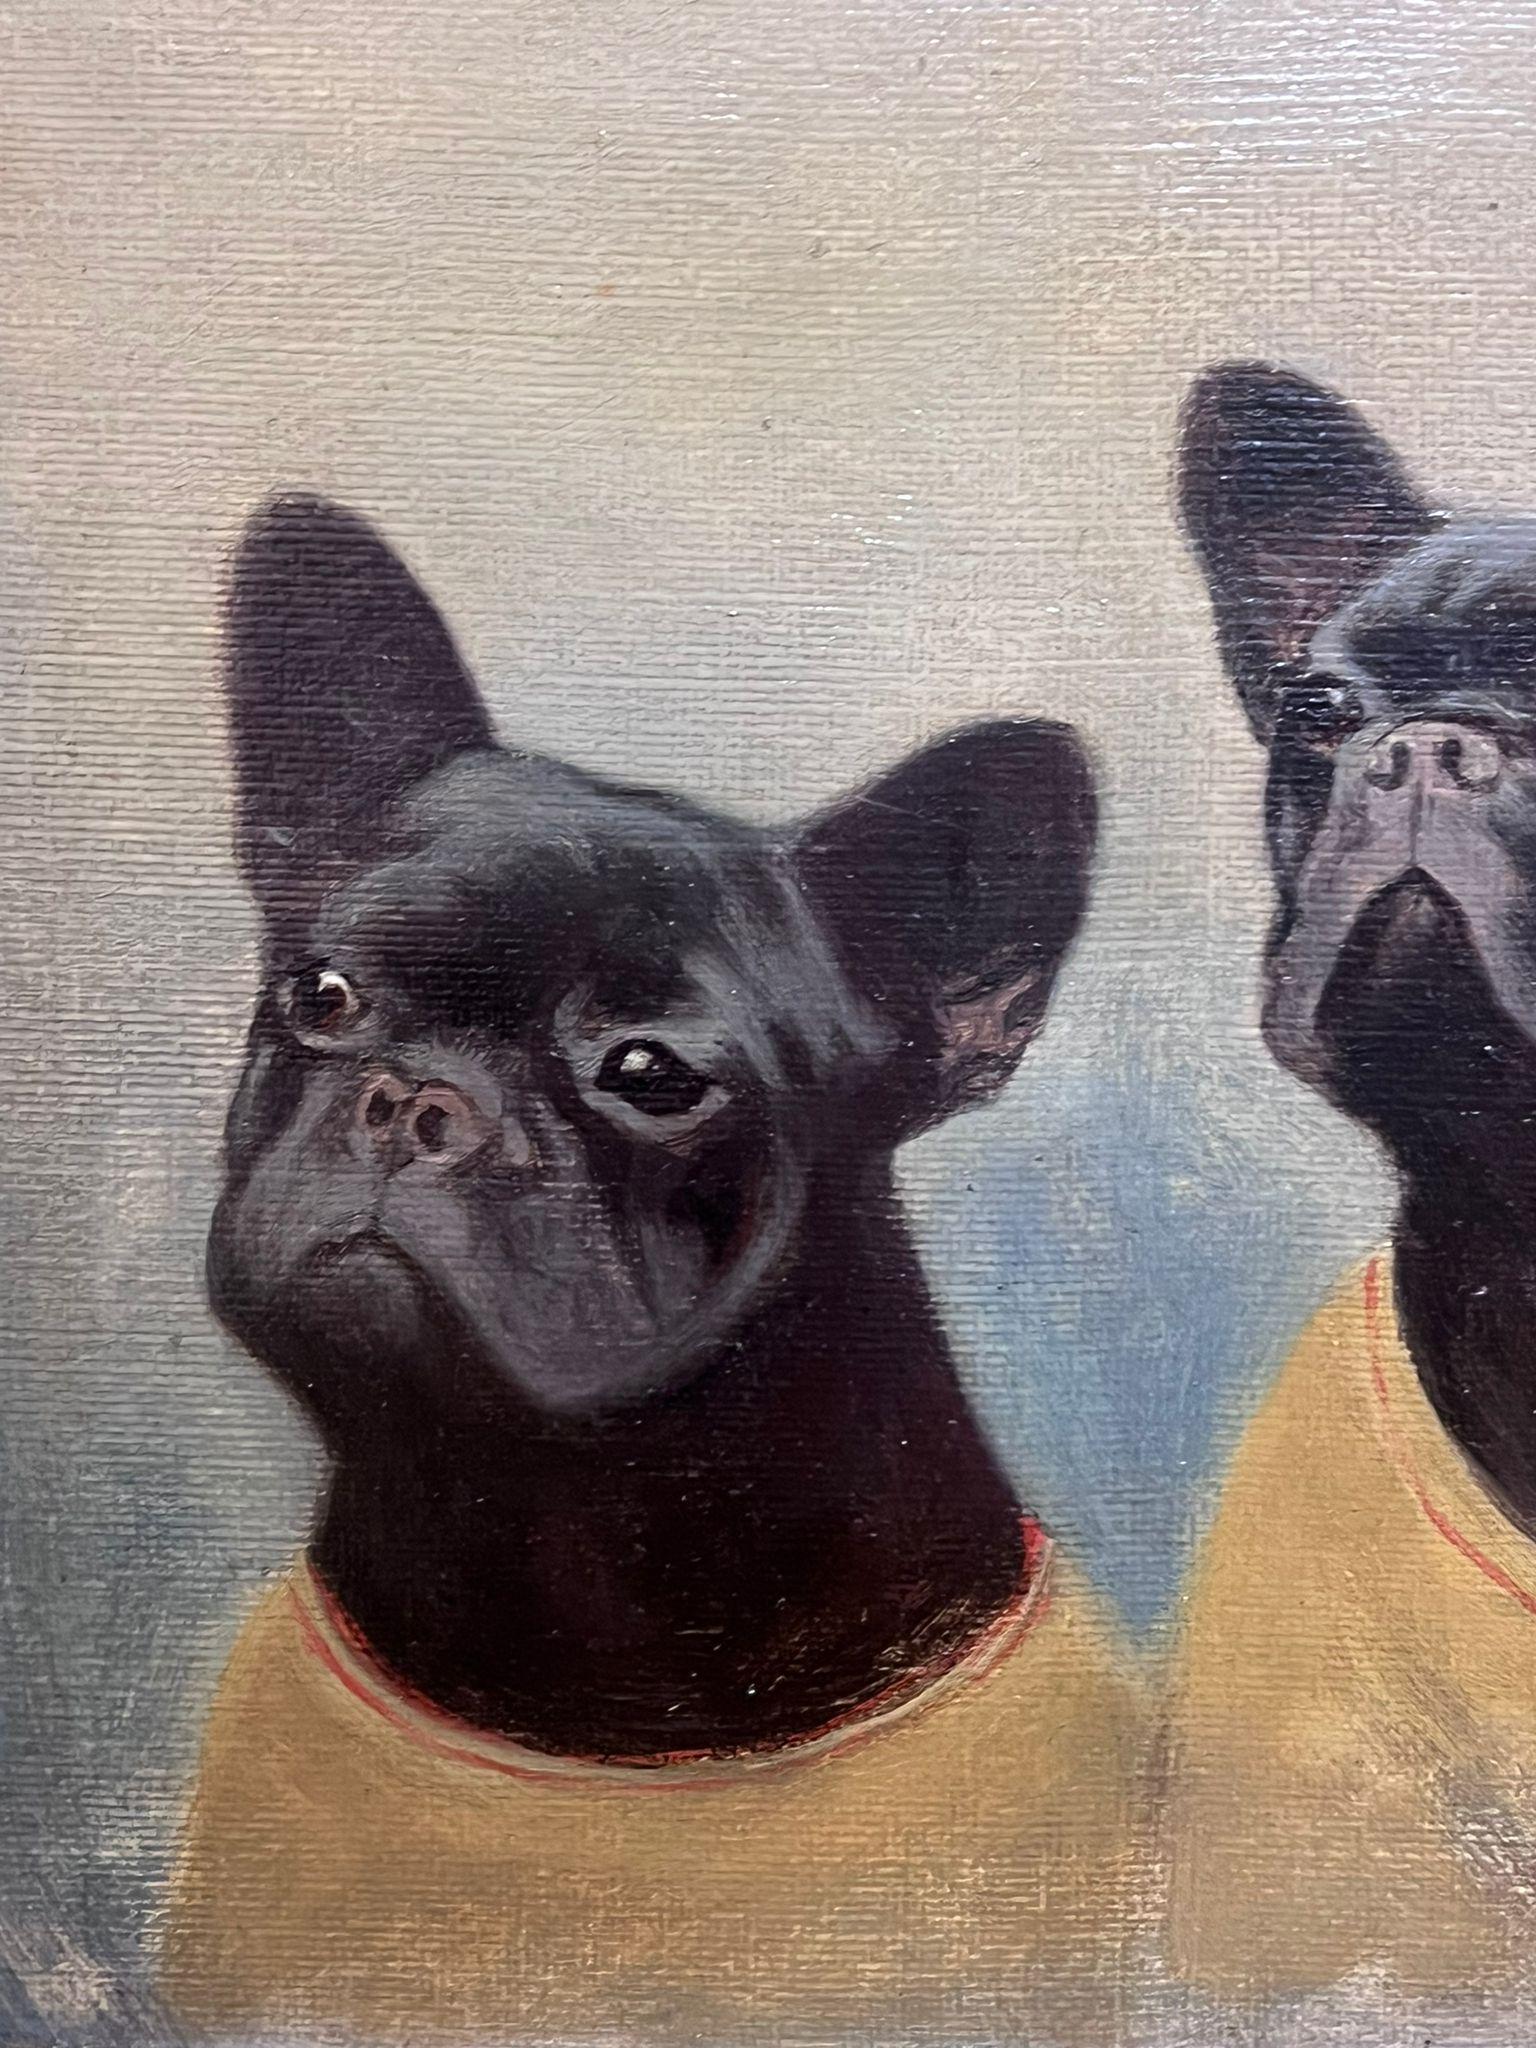 The Boston Terrier Dogs
English artist, circa 1900's
oil on board, framed
framed: 10 x 14 inches
board: 8 x 12 inches
provenance: private collection, England
condition: overall good and sound condition

The Boston Terrier breed originated in the